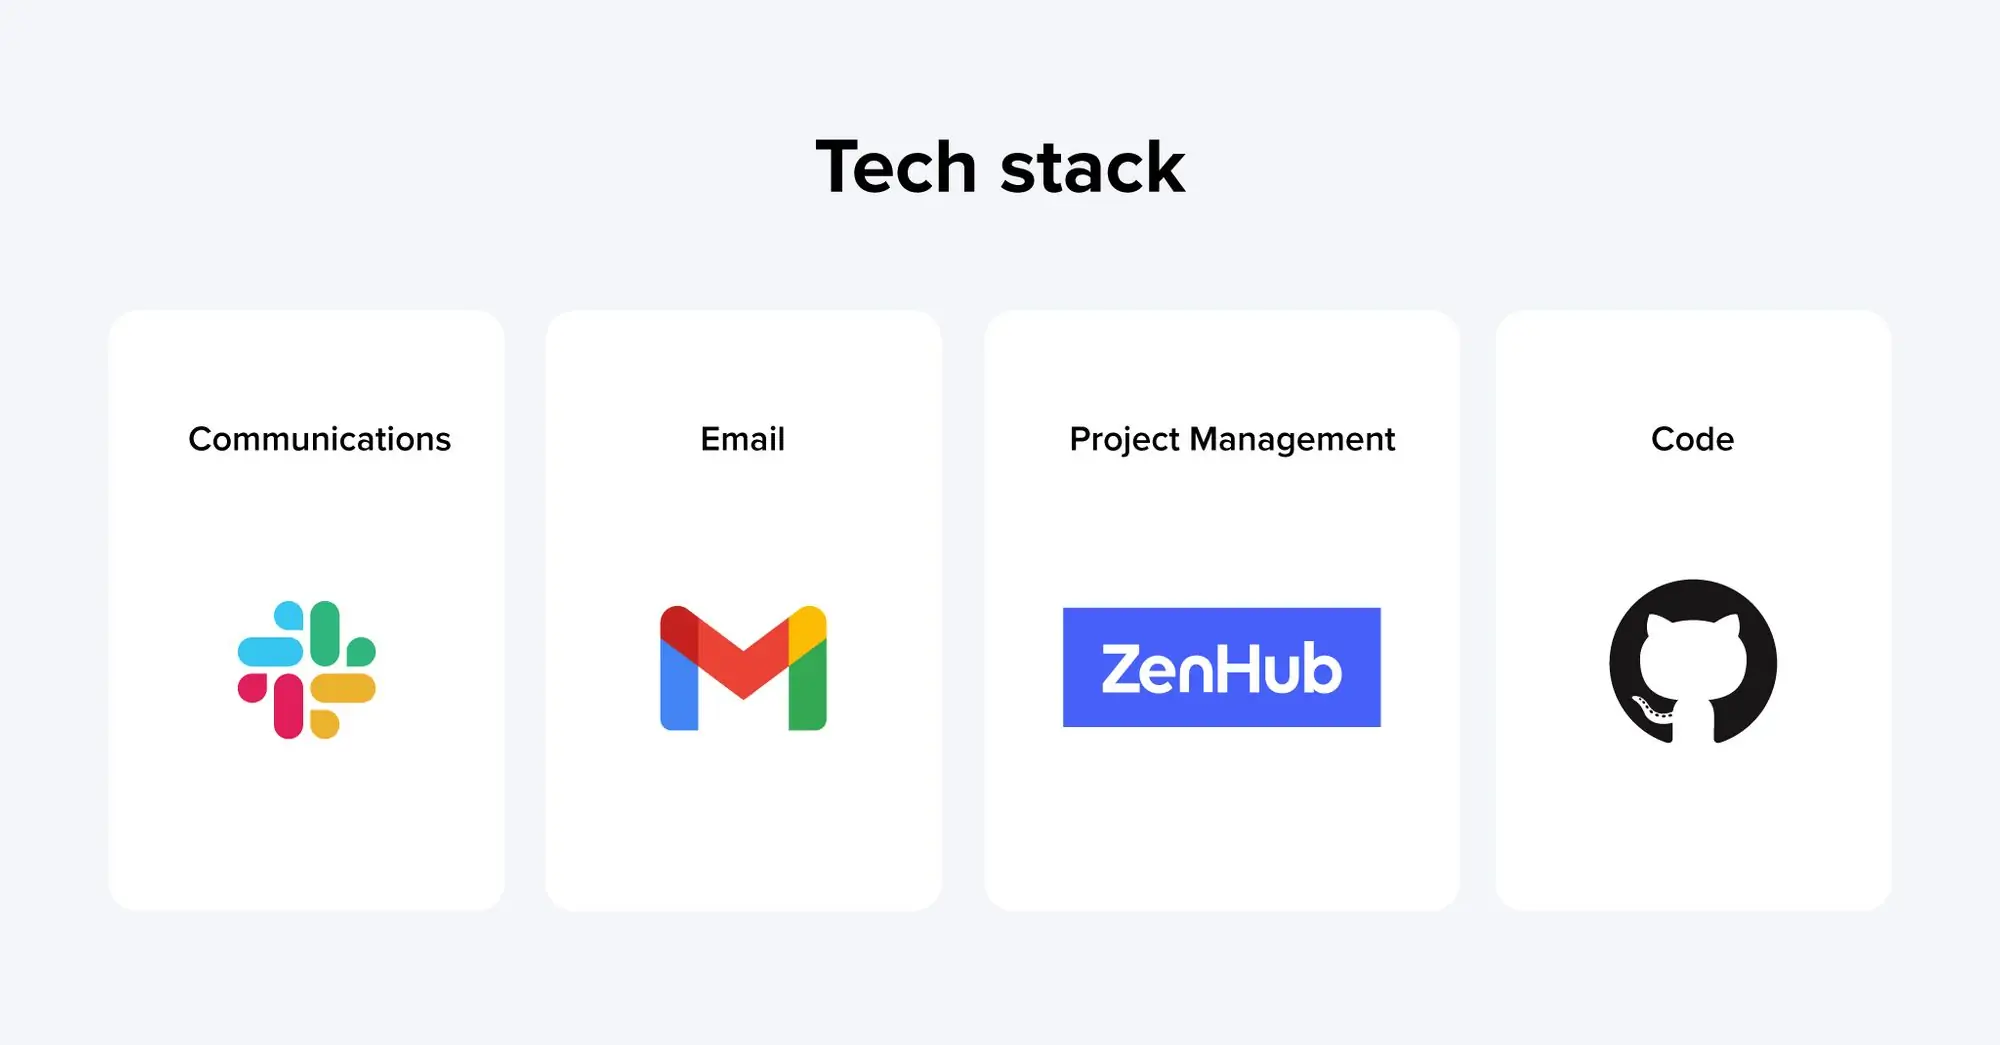 Tech stack: Slack for communications, gmail for Email, ZenHub for Project Management and GitHub for code